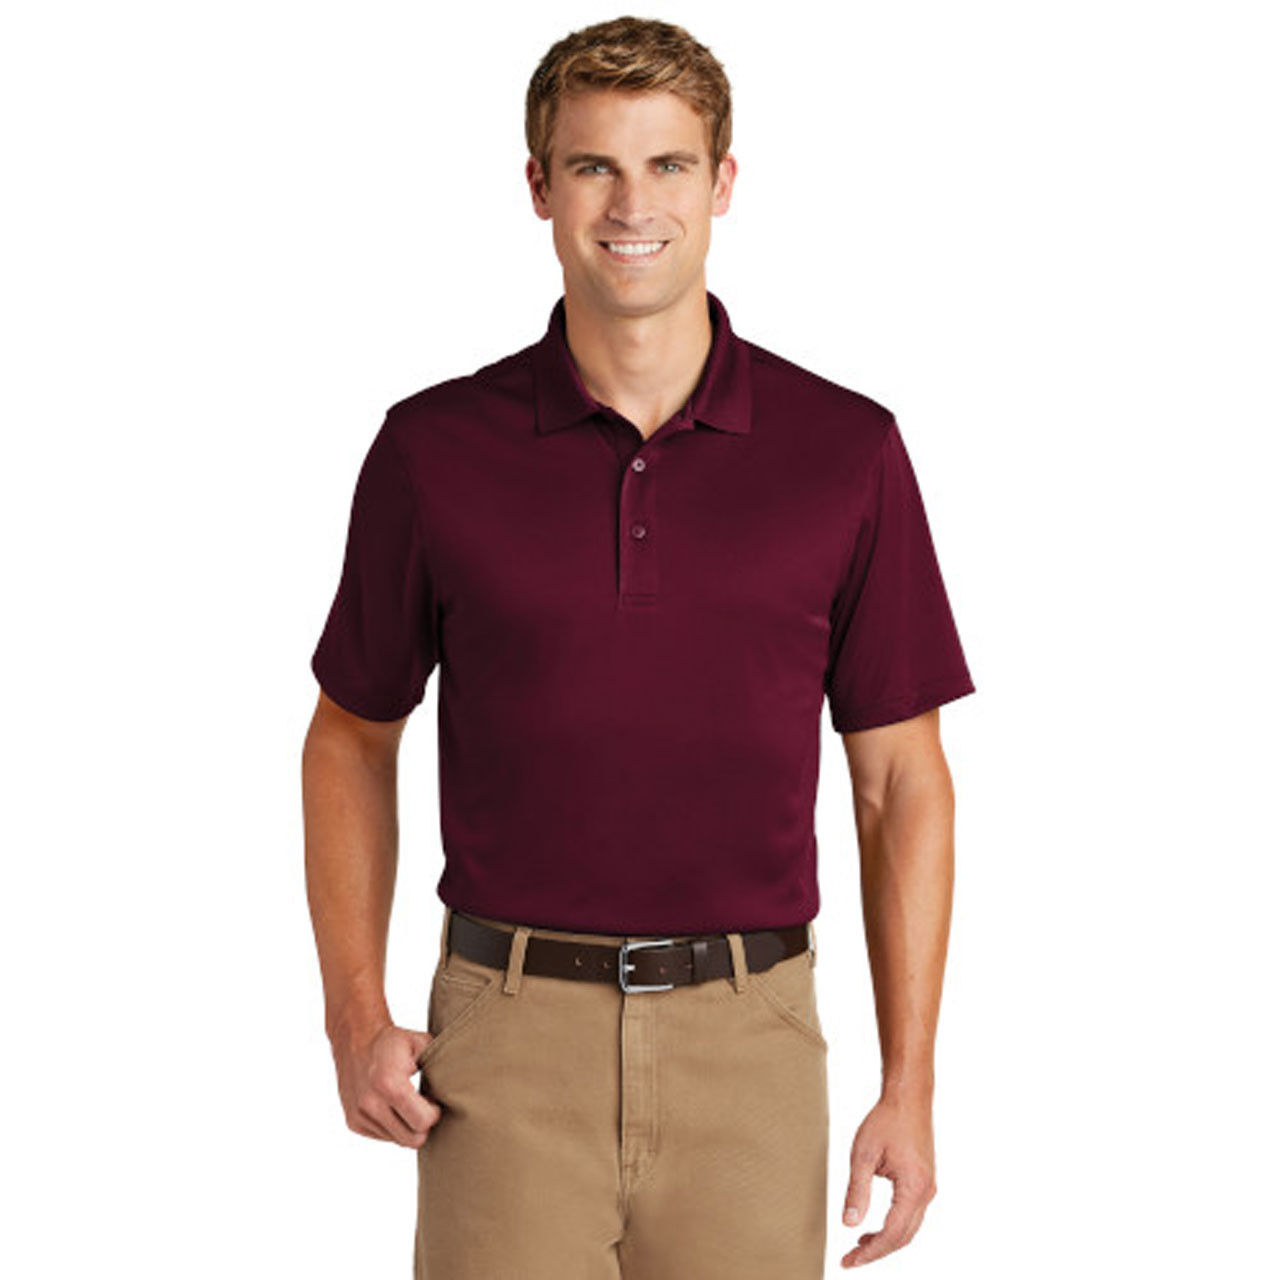 Is the men's maroon polo shirt suitable for everyday wear?